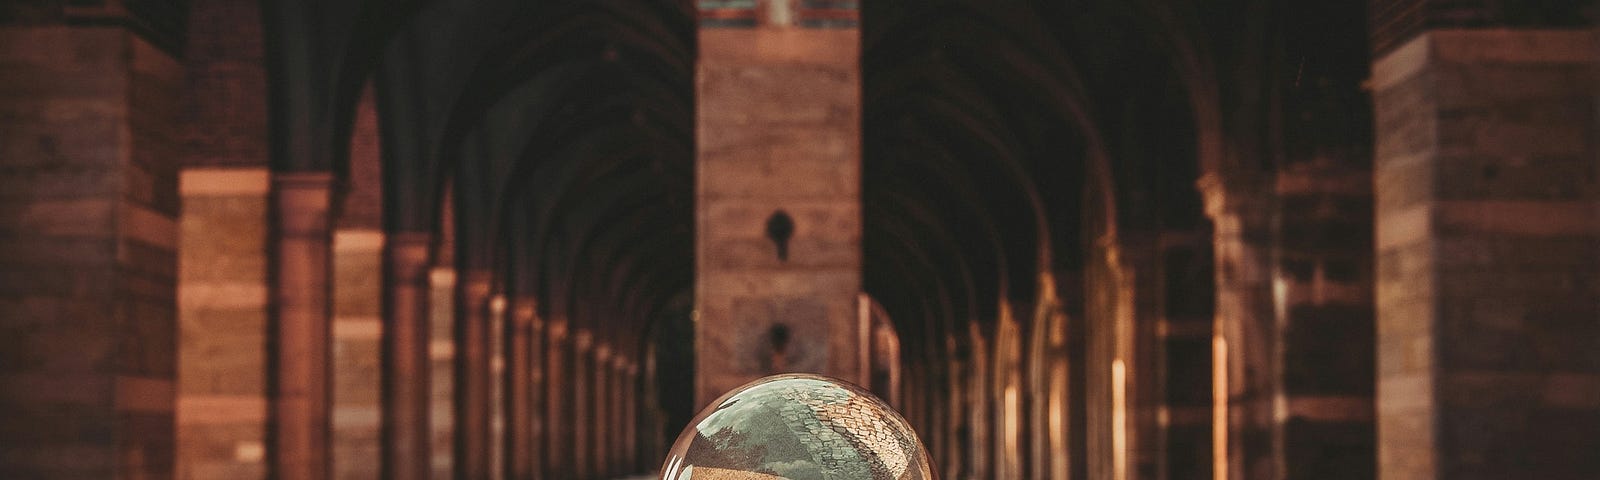 A hand with a glass sphere in the center. This shows the surroundings, a stone archway, upside down.